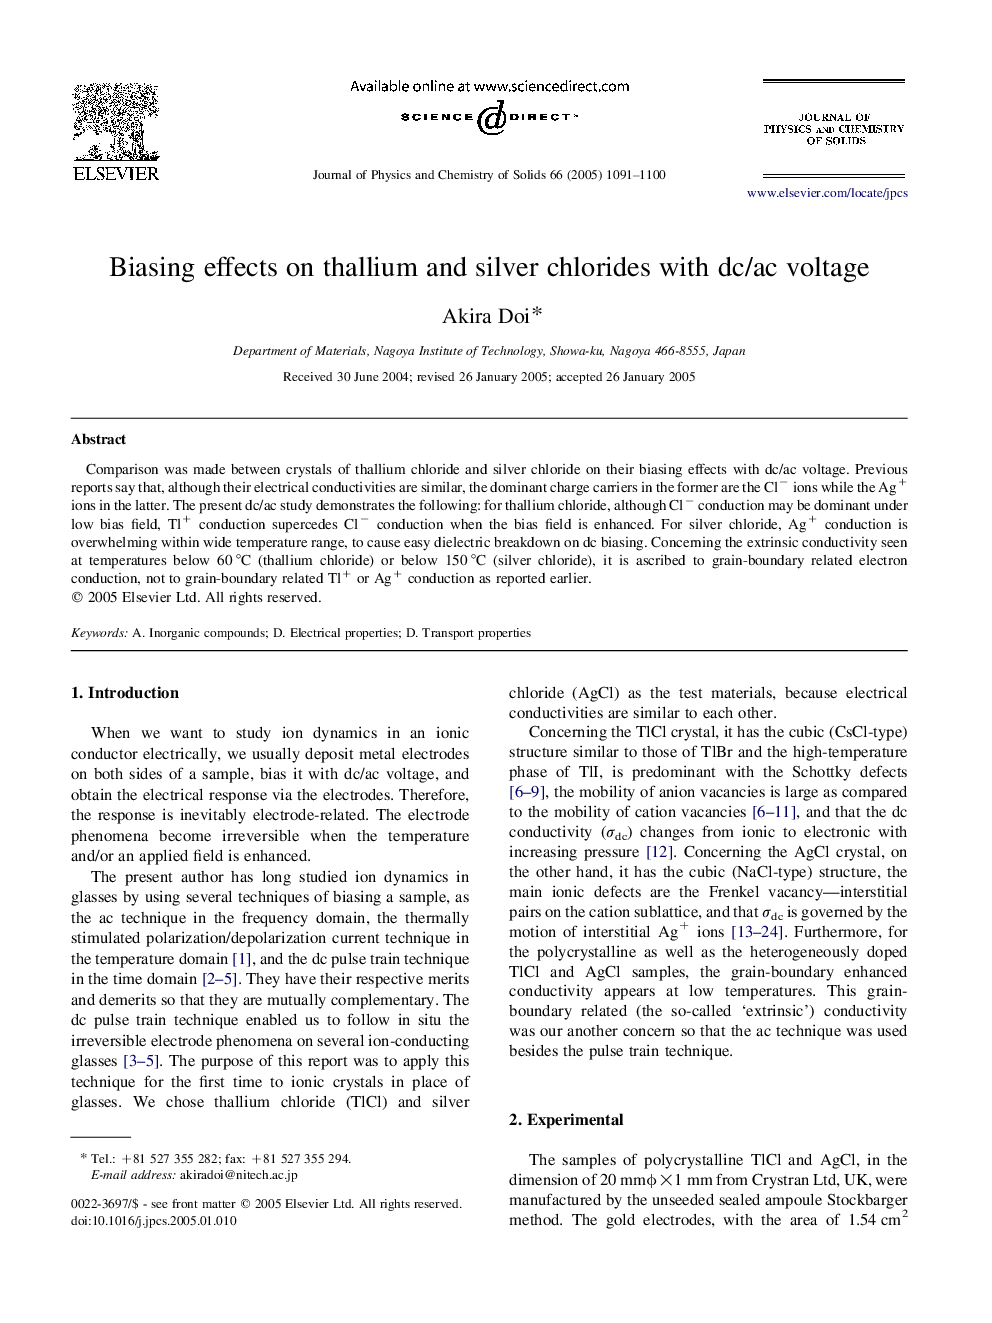 Biasing effects on thallium and silver chlorides with dc/ac voltage